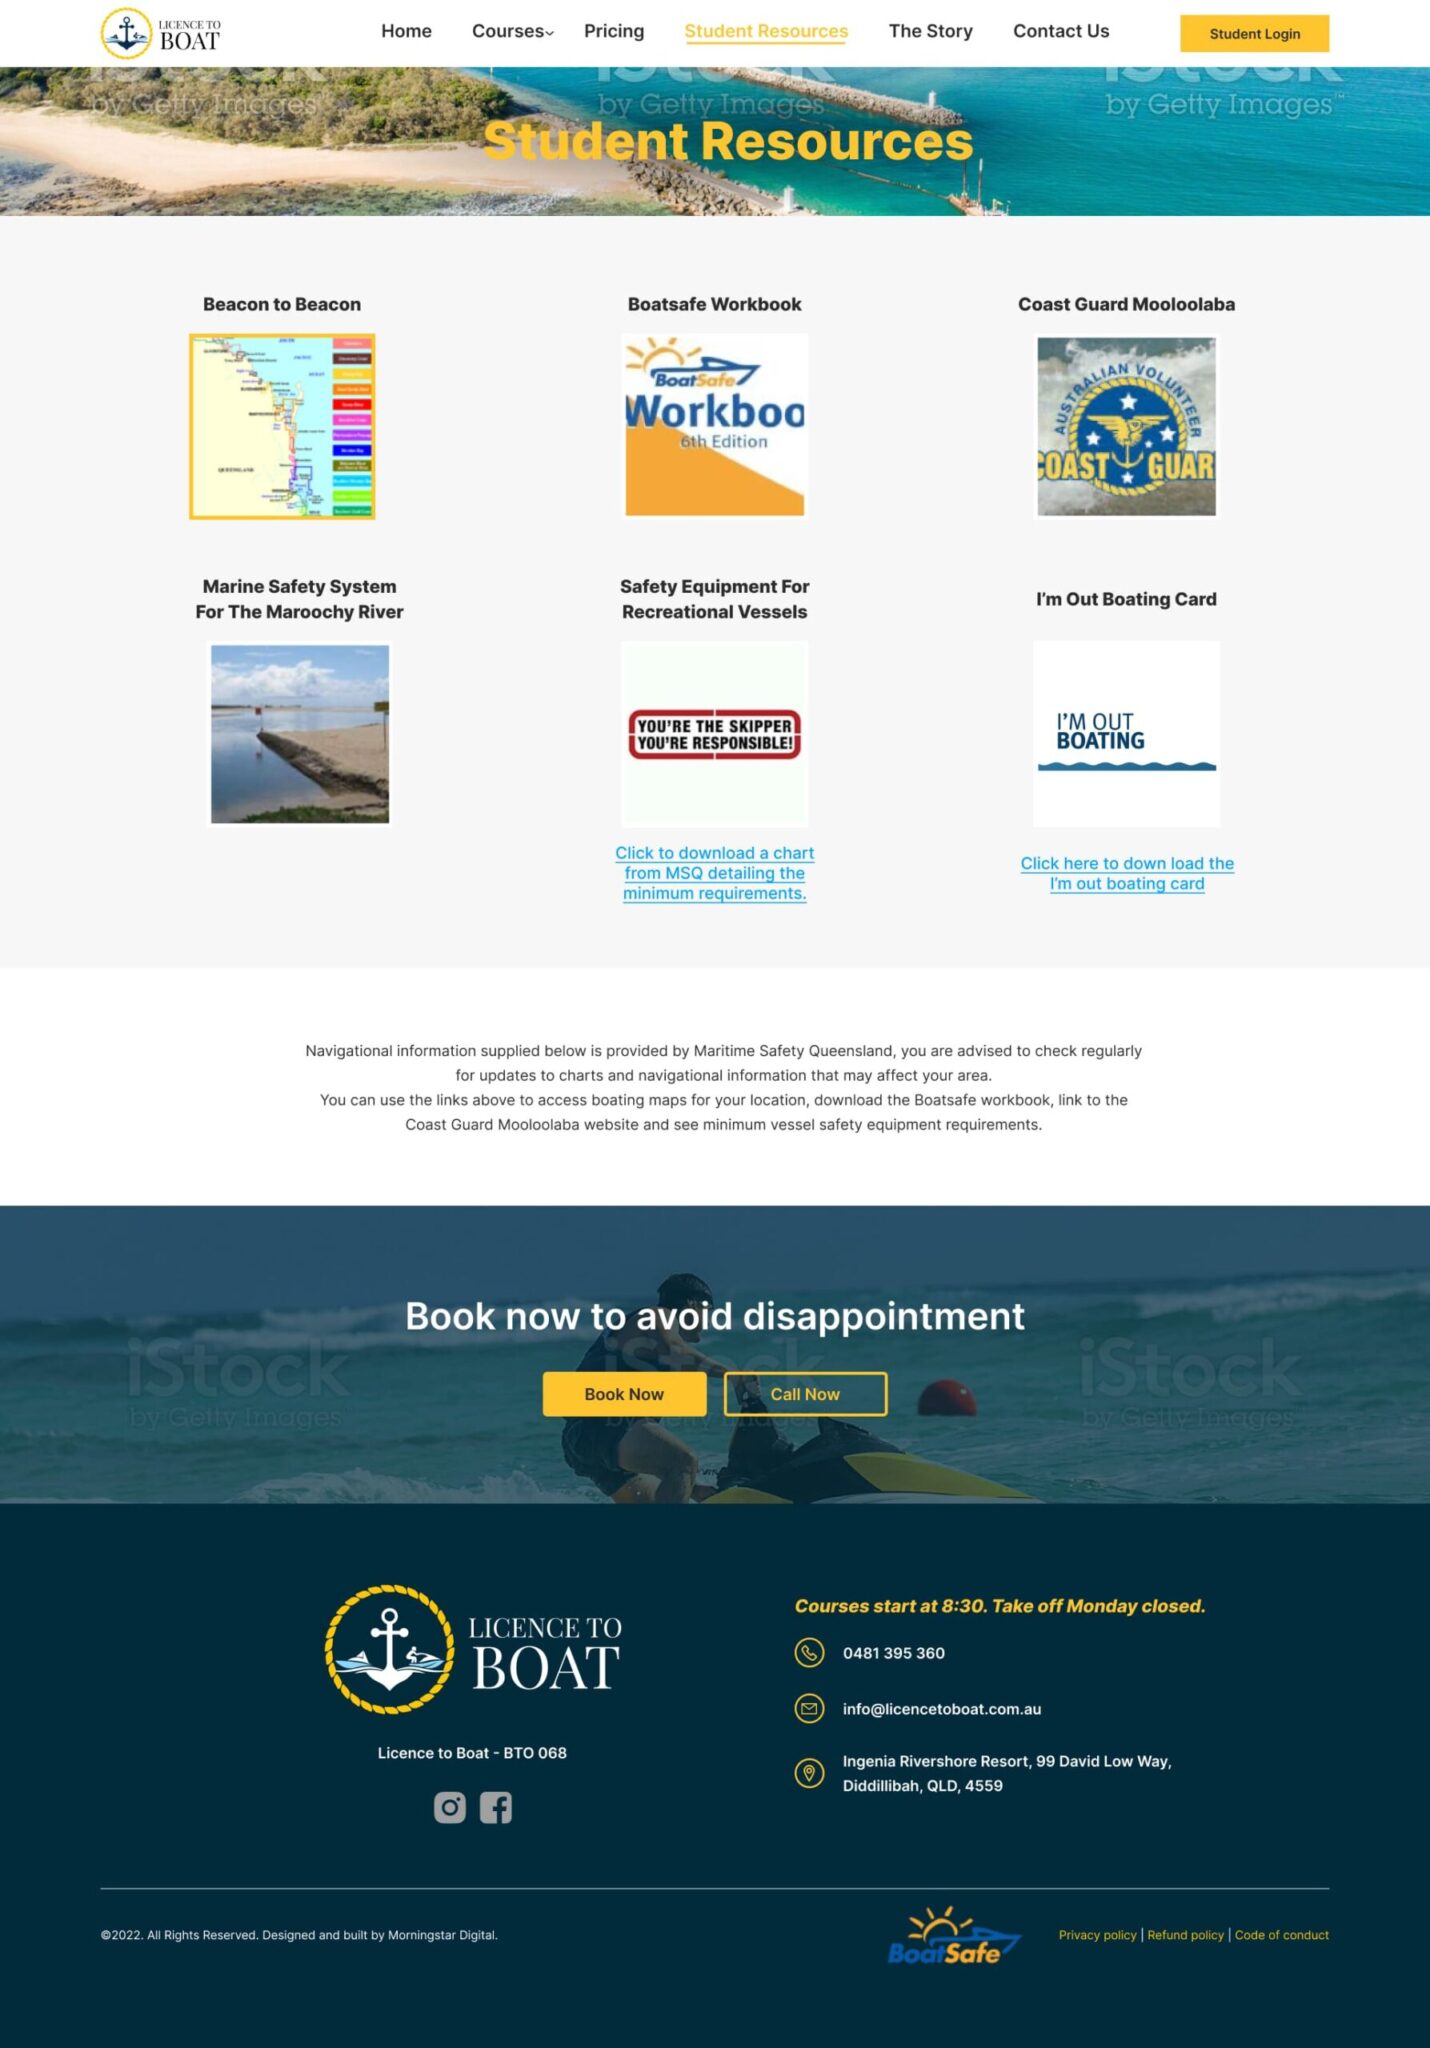 Licence to Boat Resources